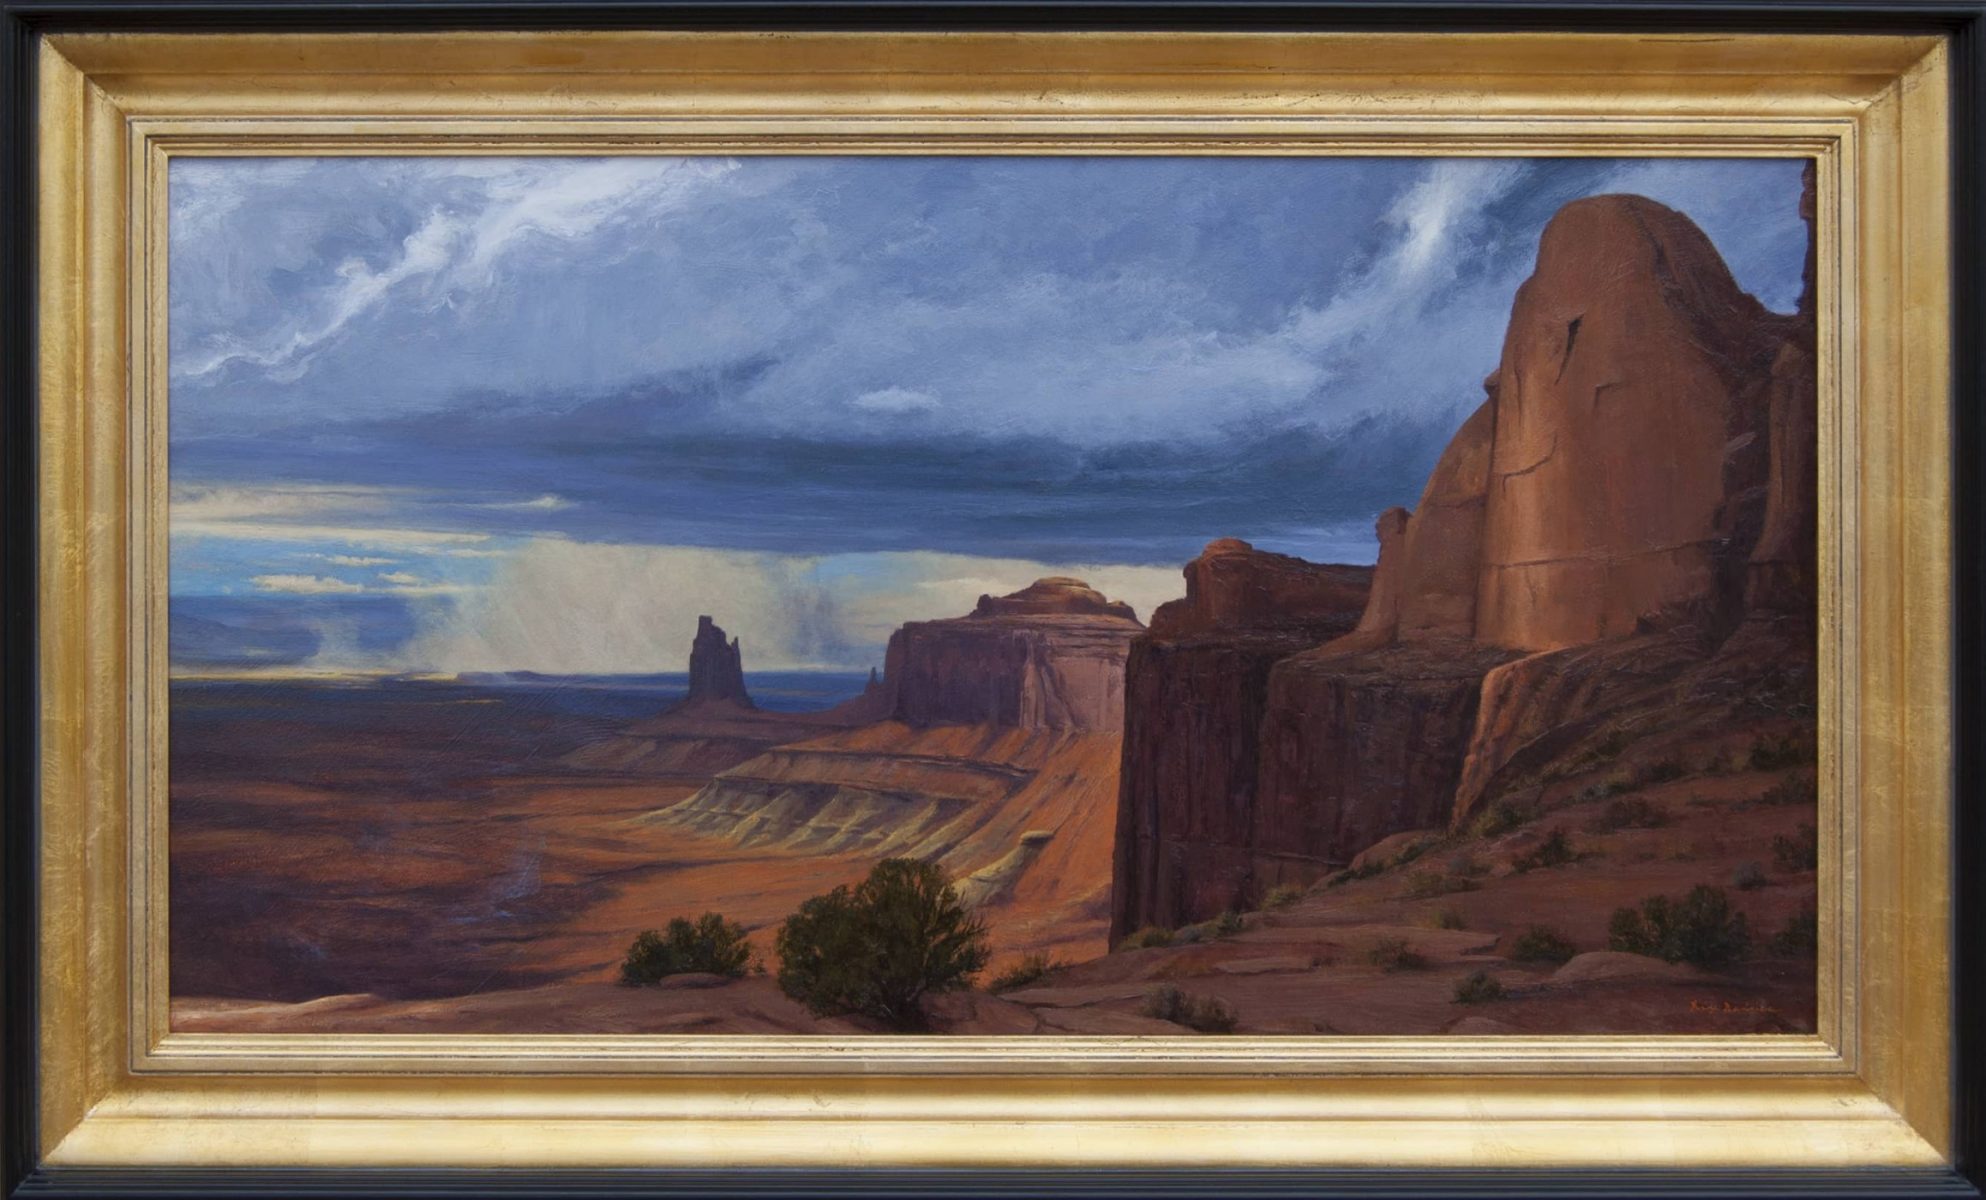 Awful Grandeur painting of Canyonlands national park by artist Dix Baines